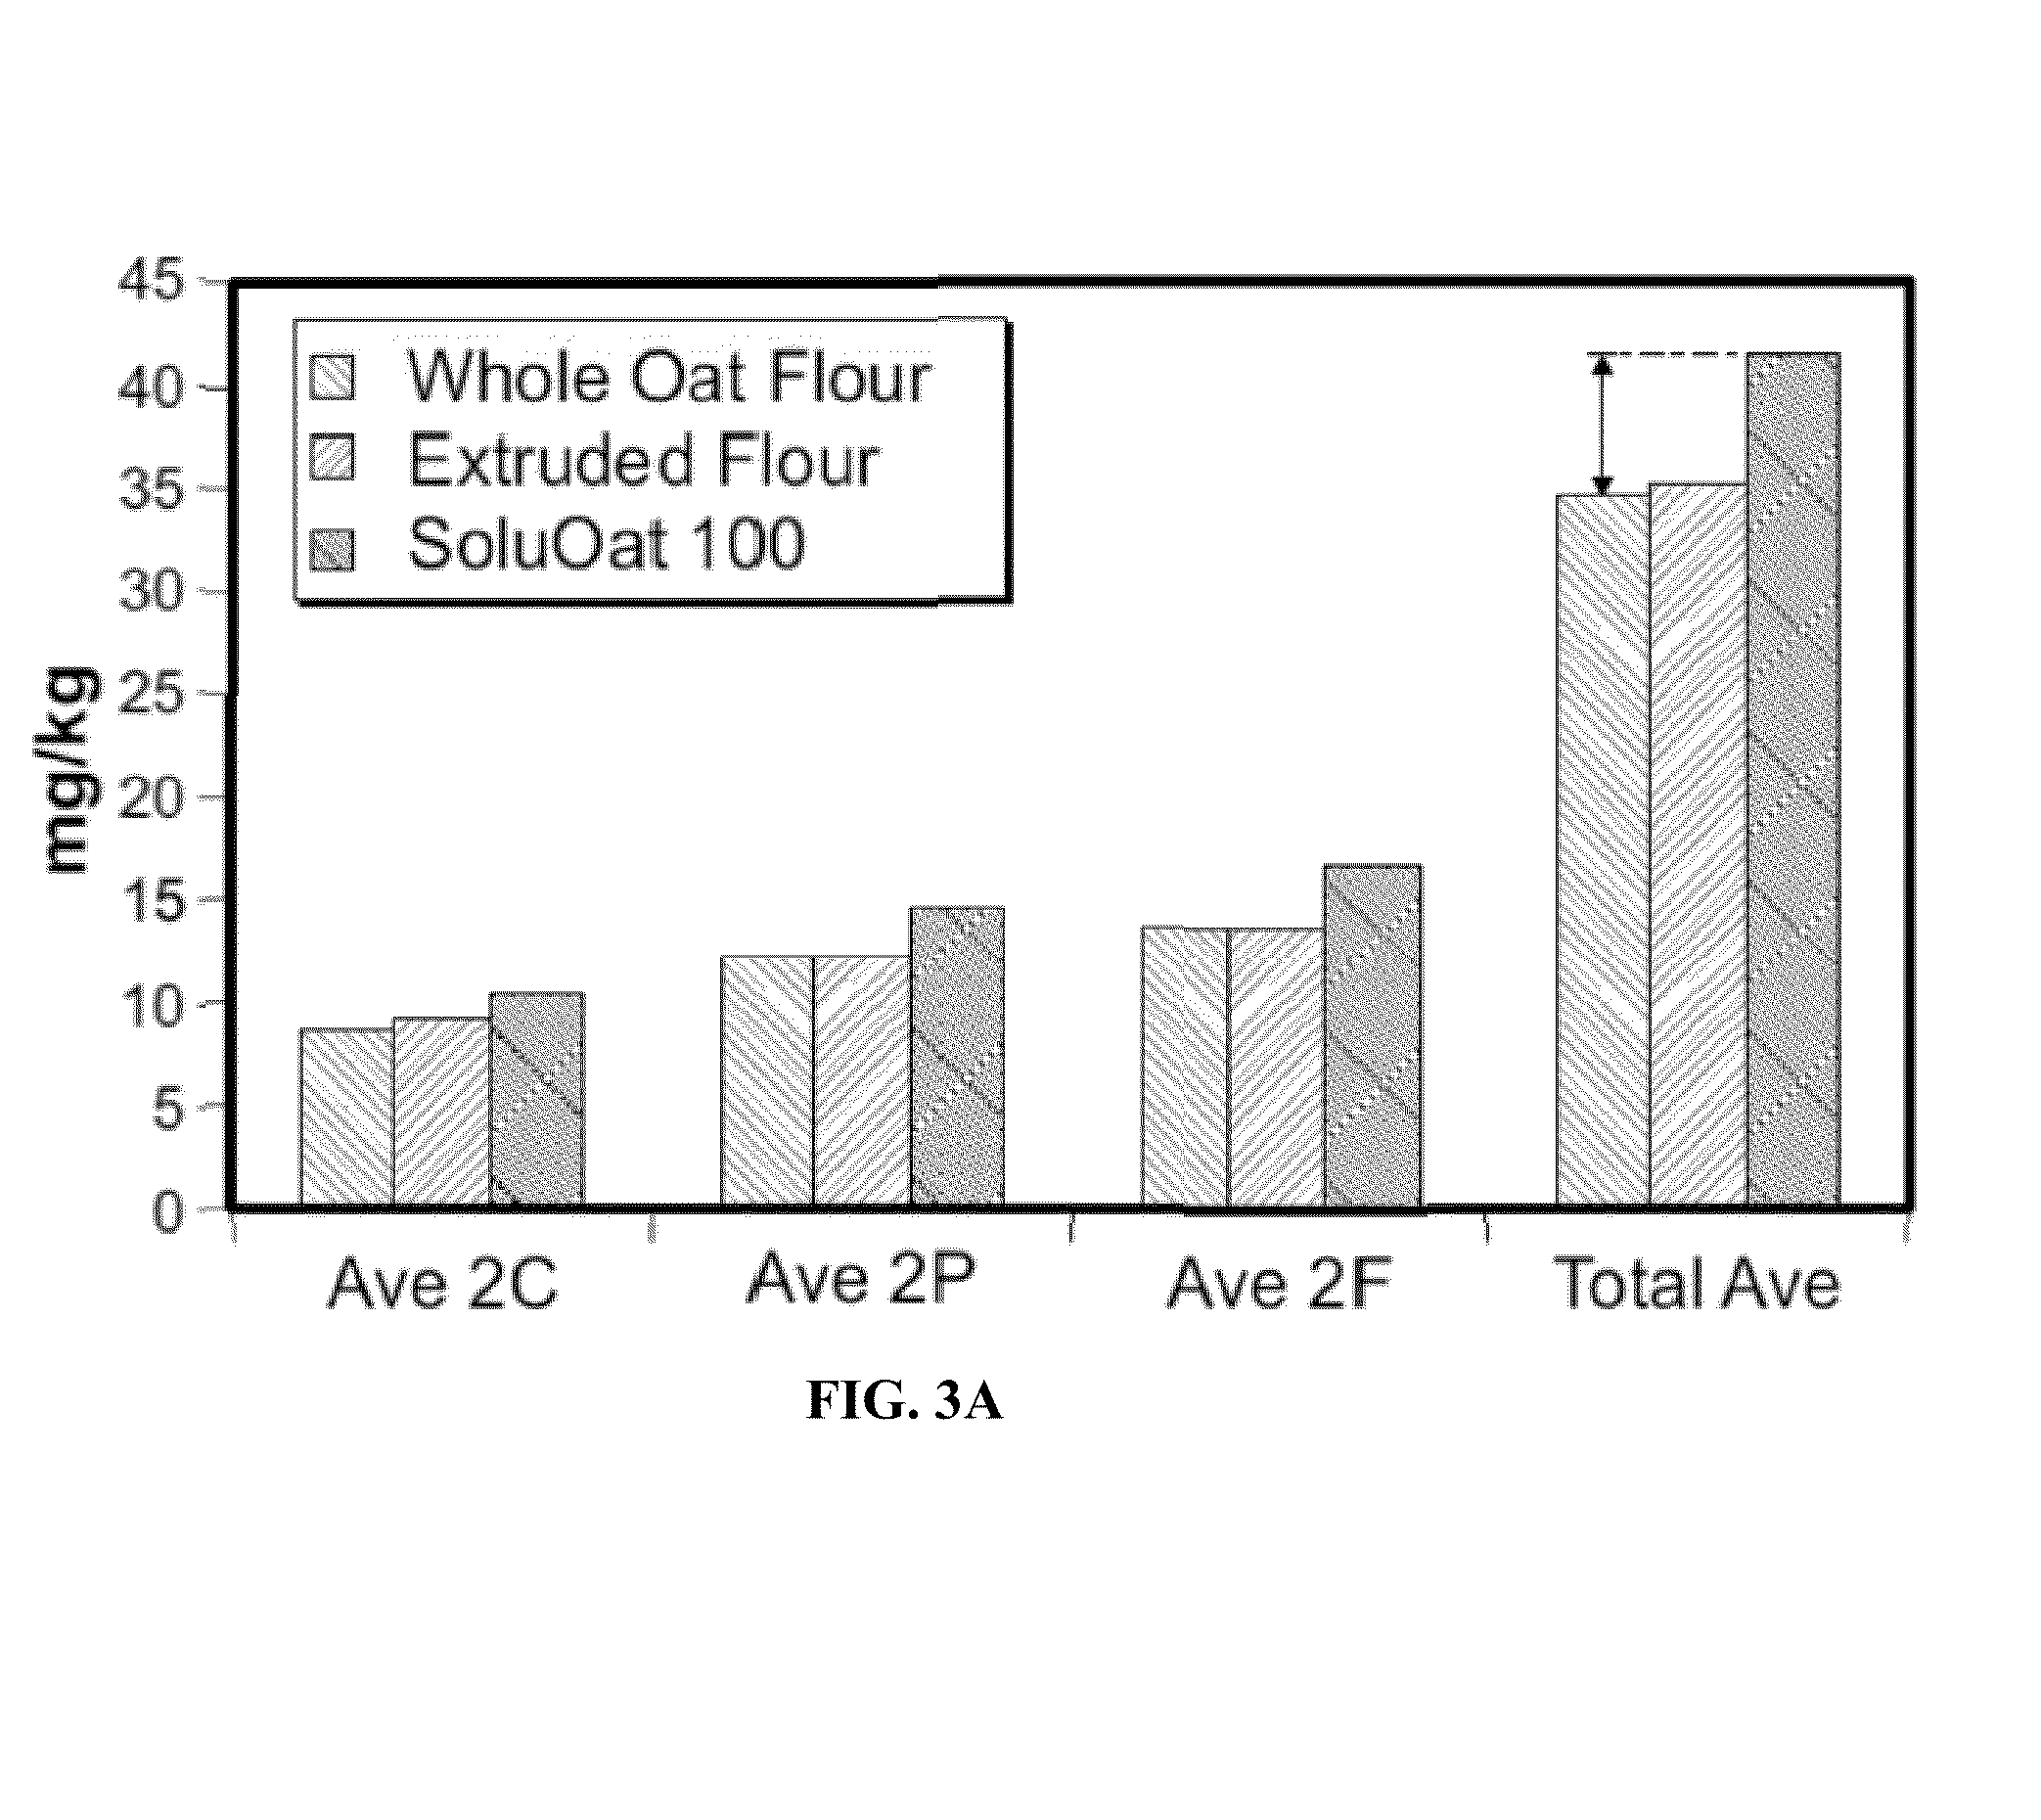 Method of preparing highly dispersible whole grain flour with an increased avenanthramide content